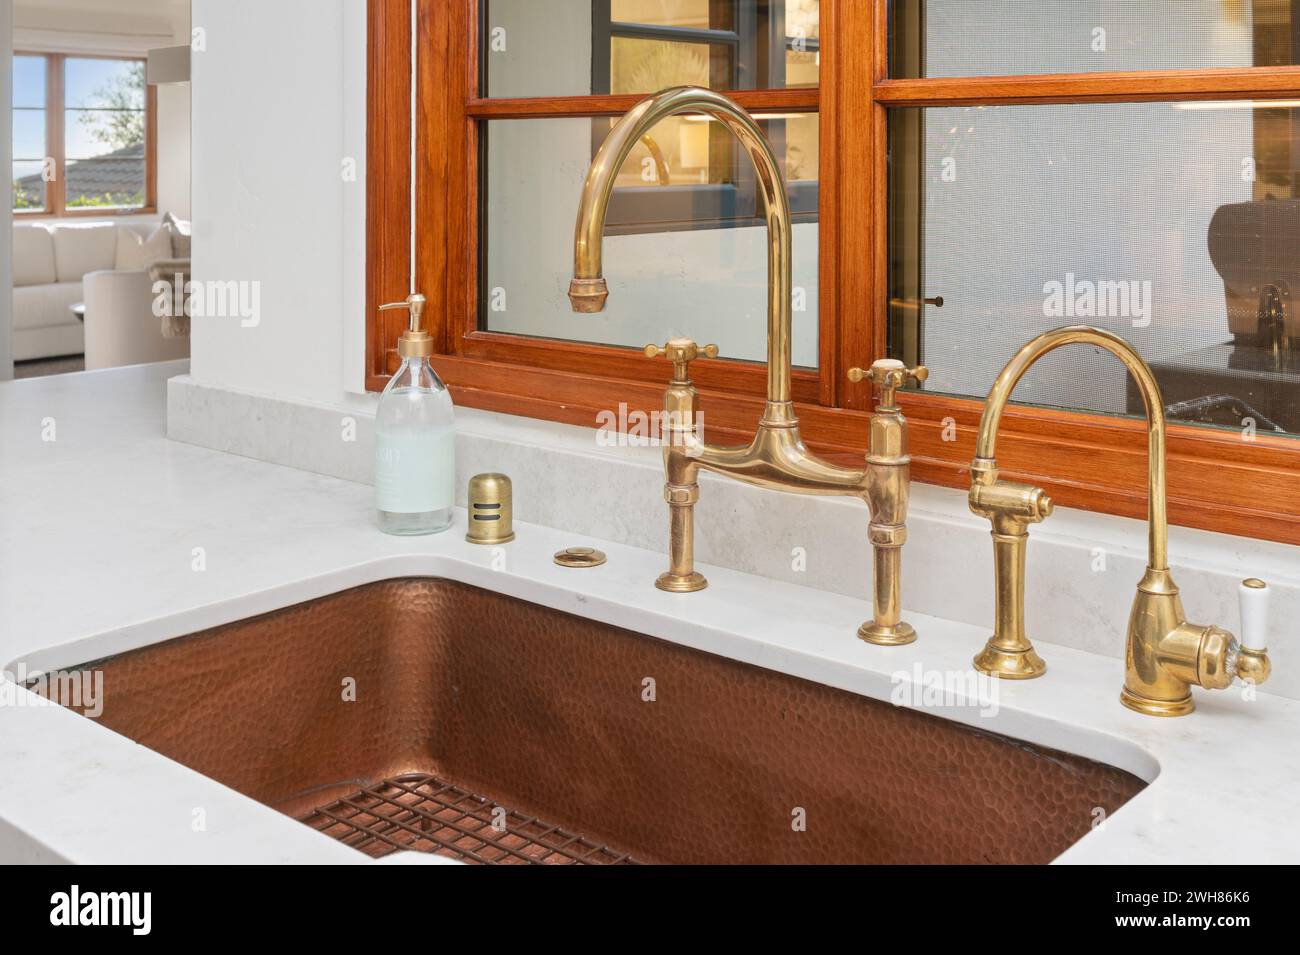 Large window behind copper sink in kitchen area Stock Photo